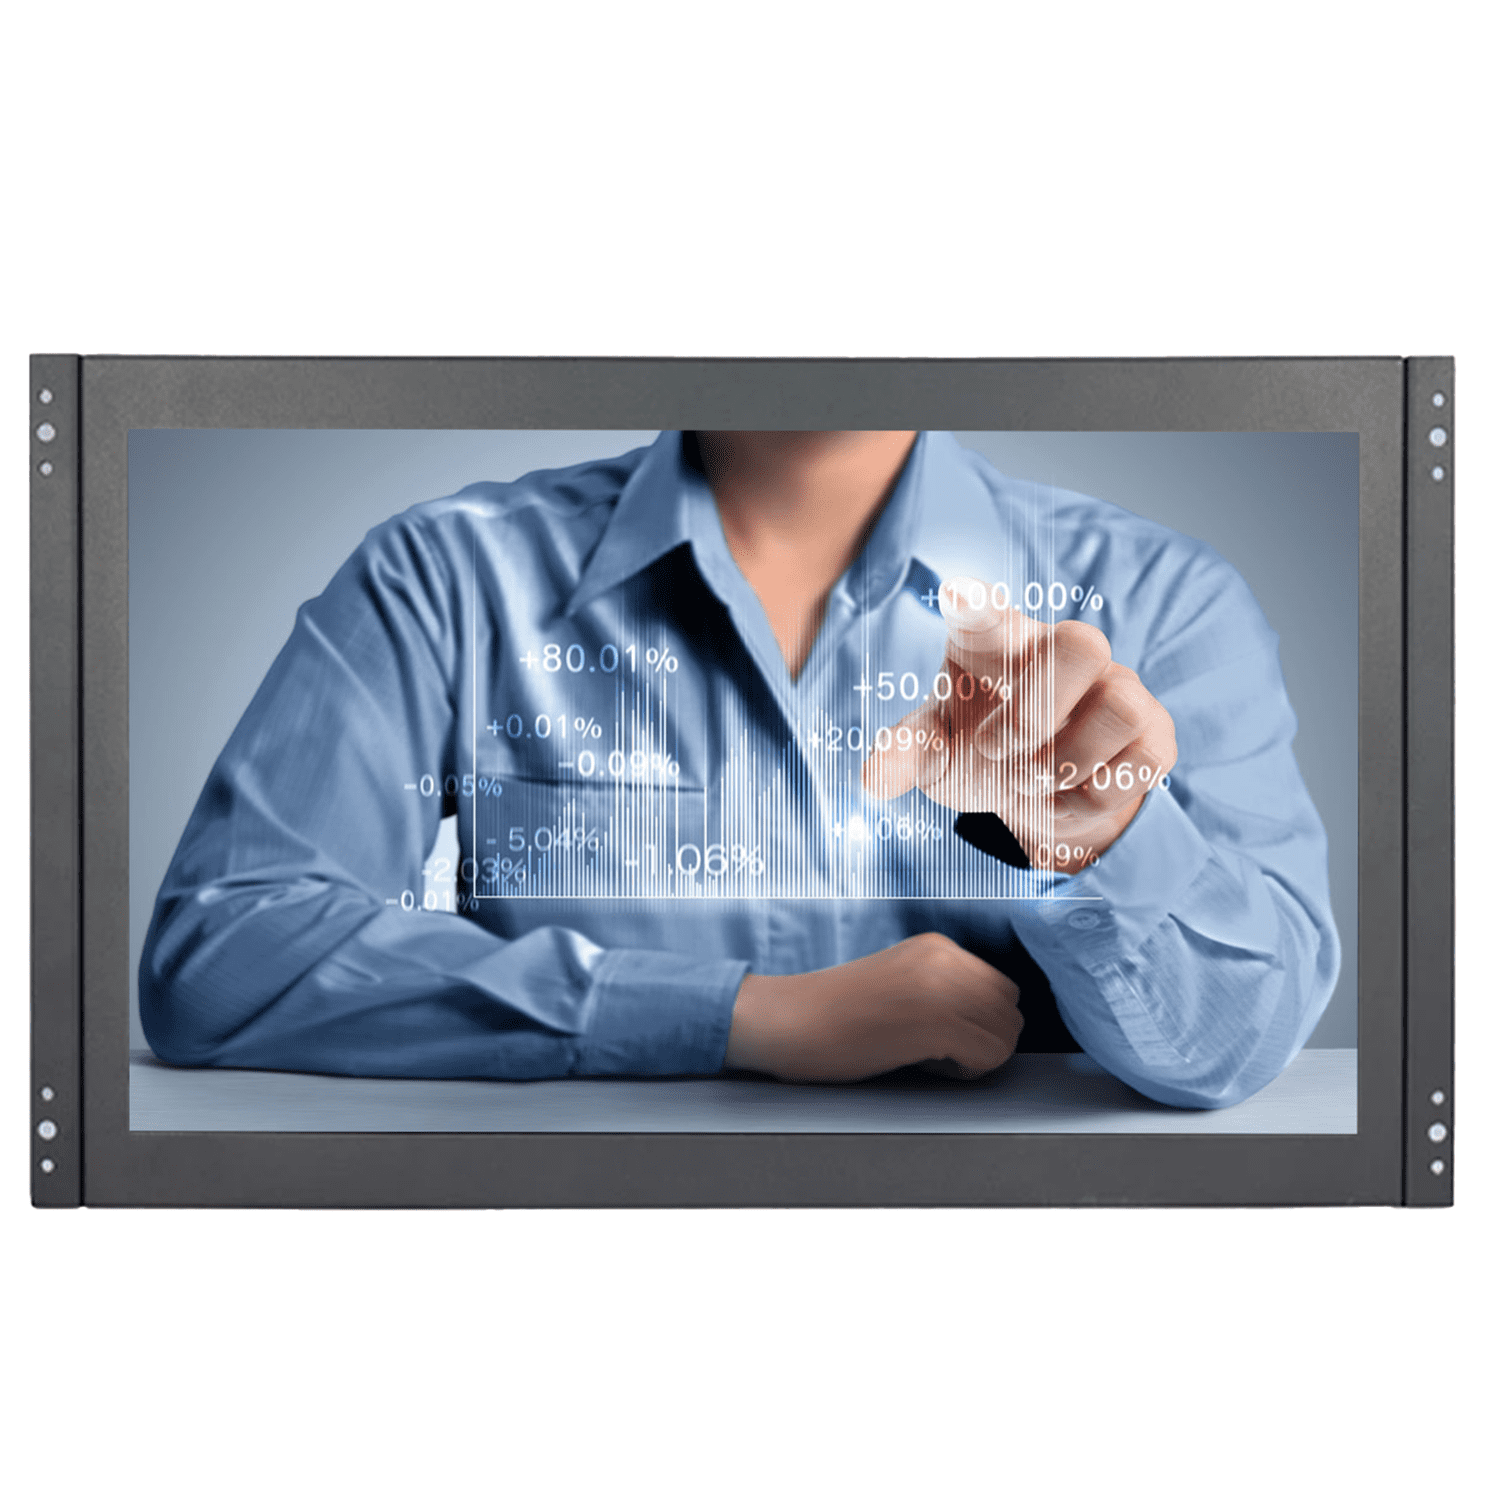 23.8 inch high-definition industrial touch open VGAHDMI LCD monitor